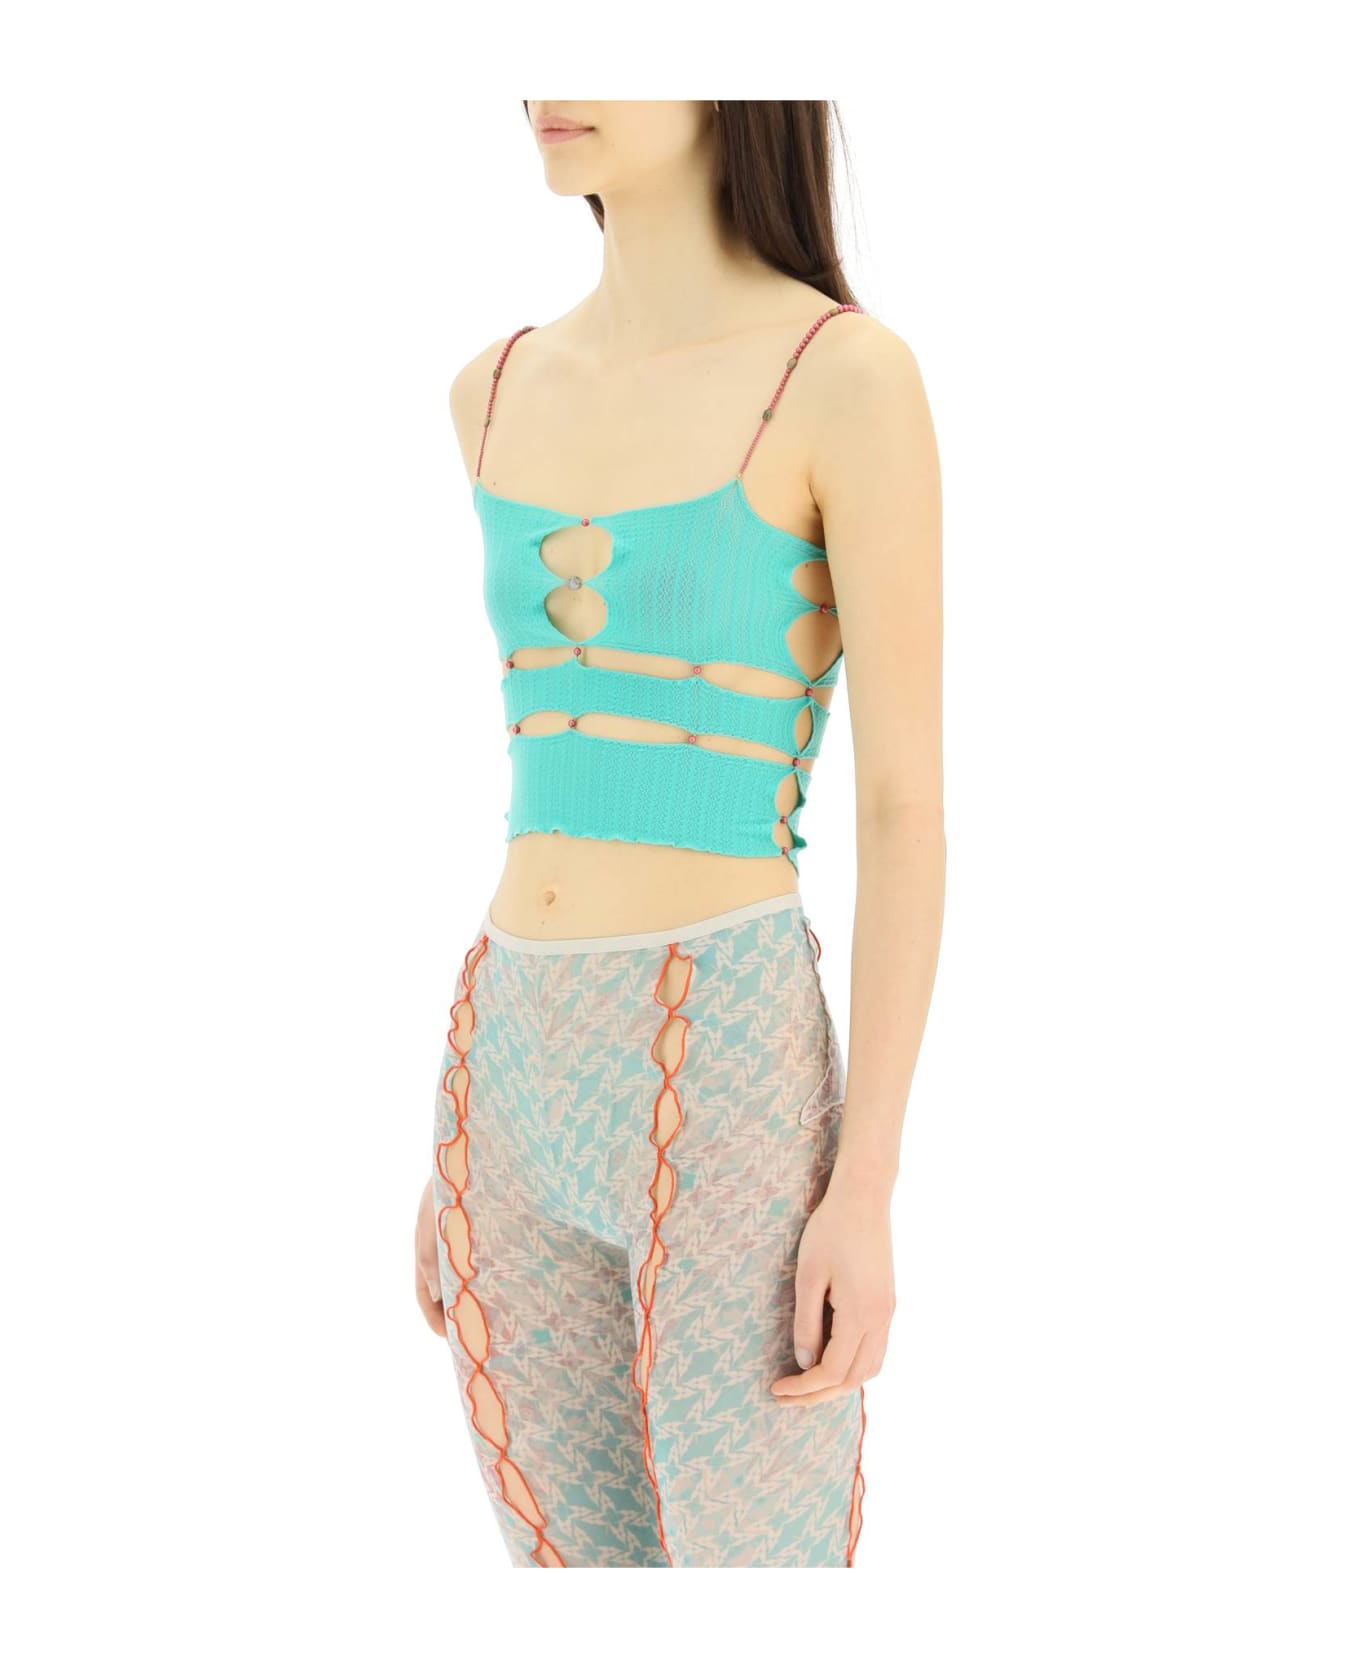 Rui Knit Crop Top With Cut-out And Beads - SEAFOAM (Green)